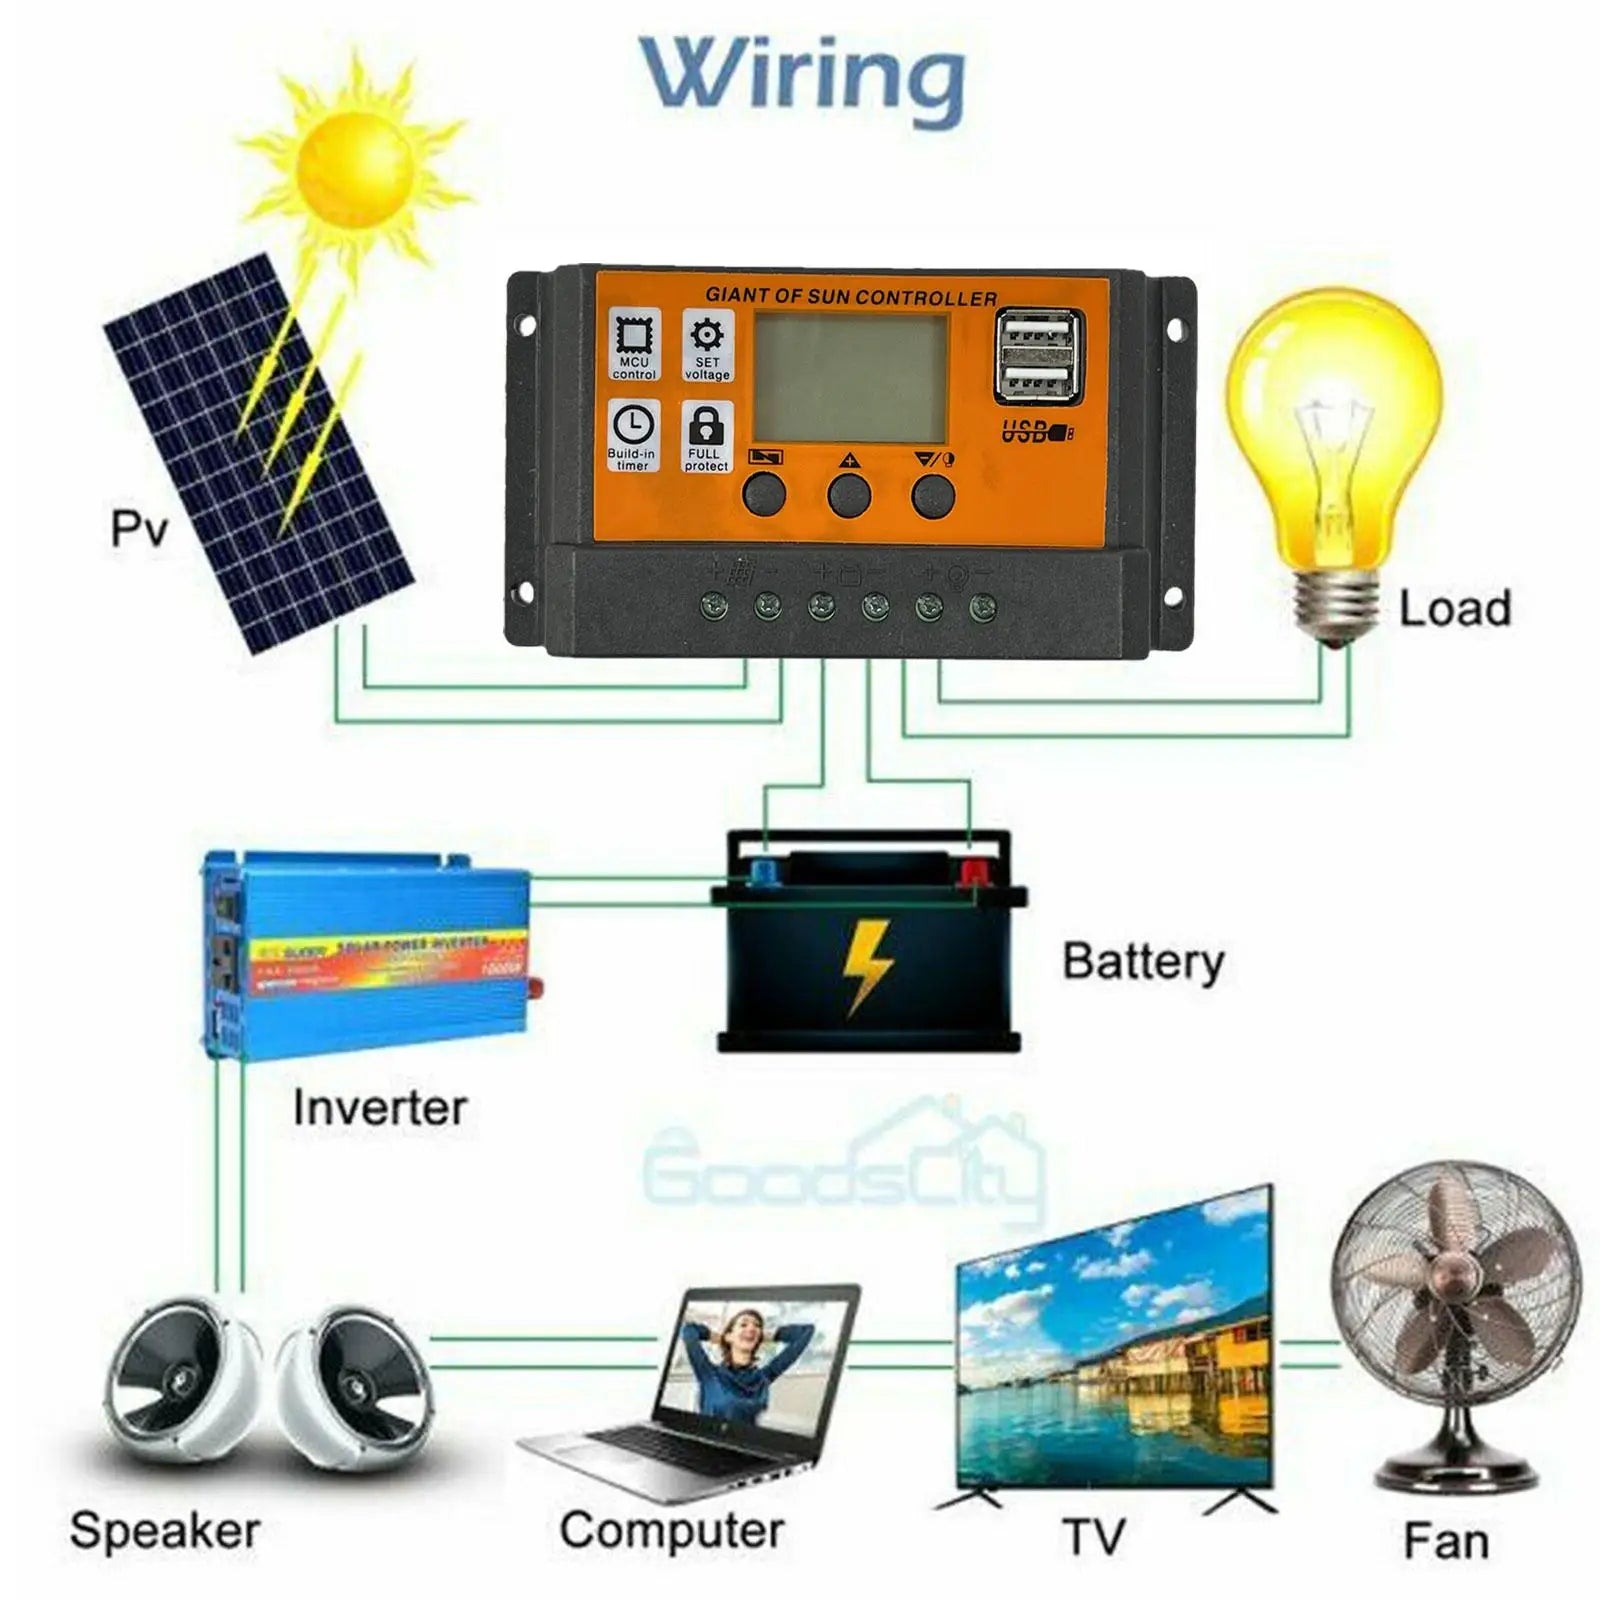 MPPT Solar Charge Controller, Solar charge controller for efficient energy management